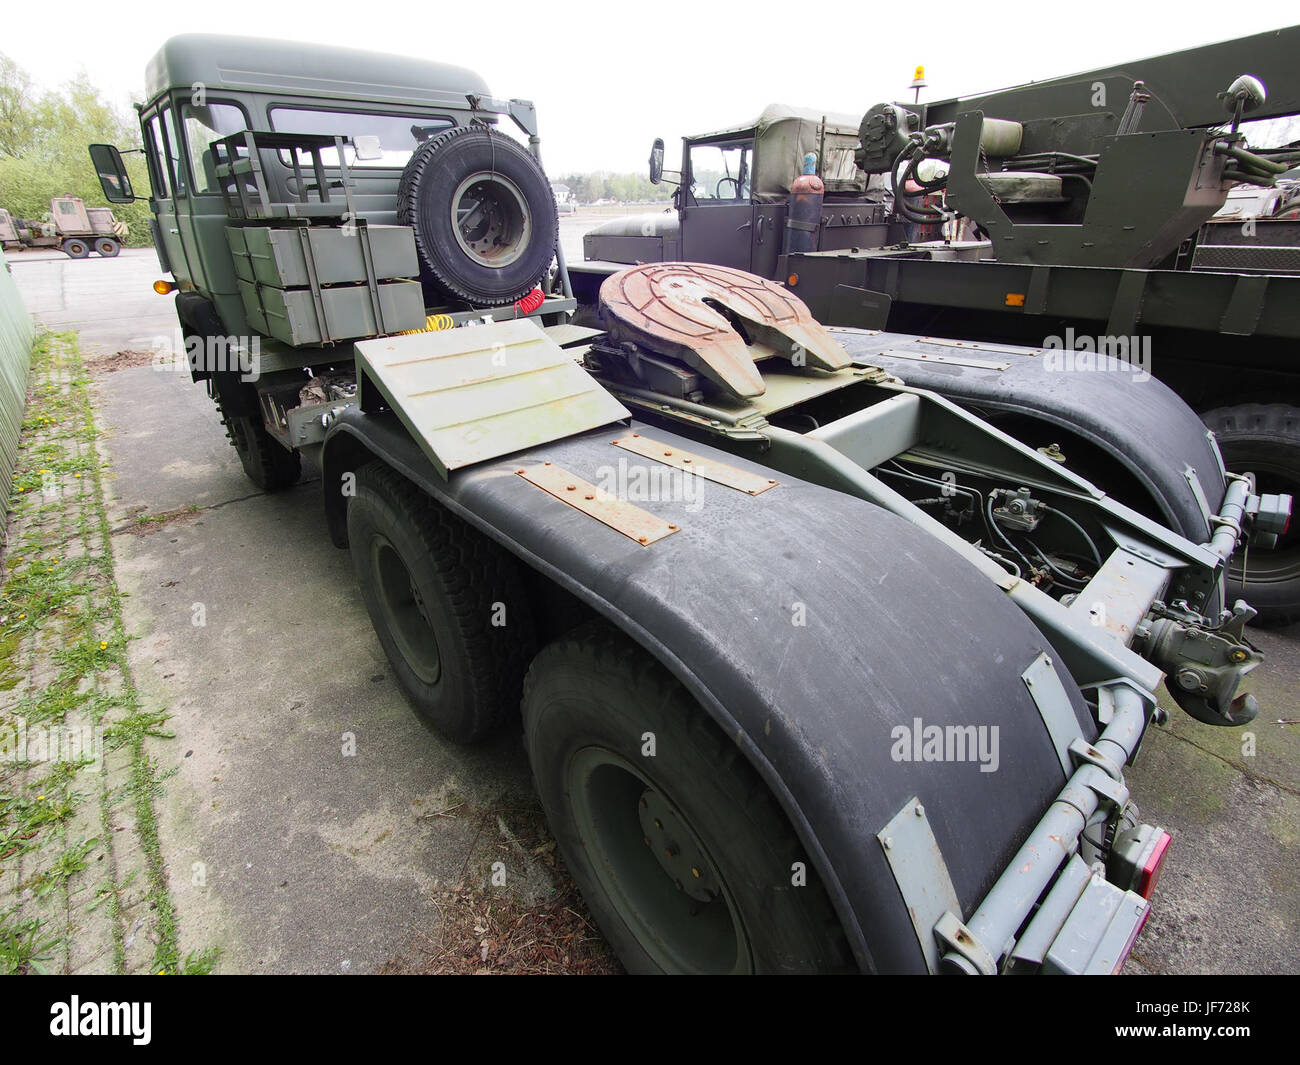 Magirus Deutz High Resolution Stock Photography and Images - Alamy